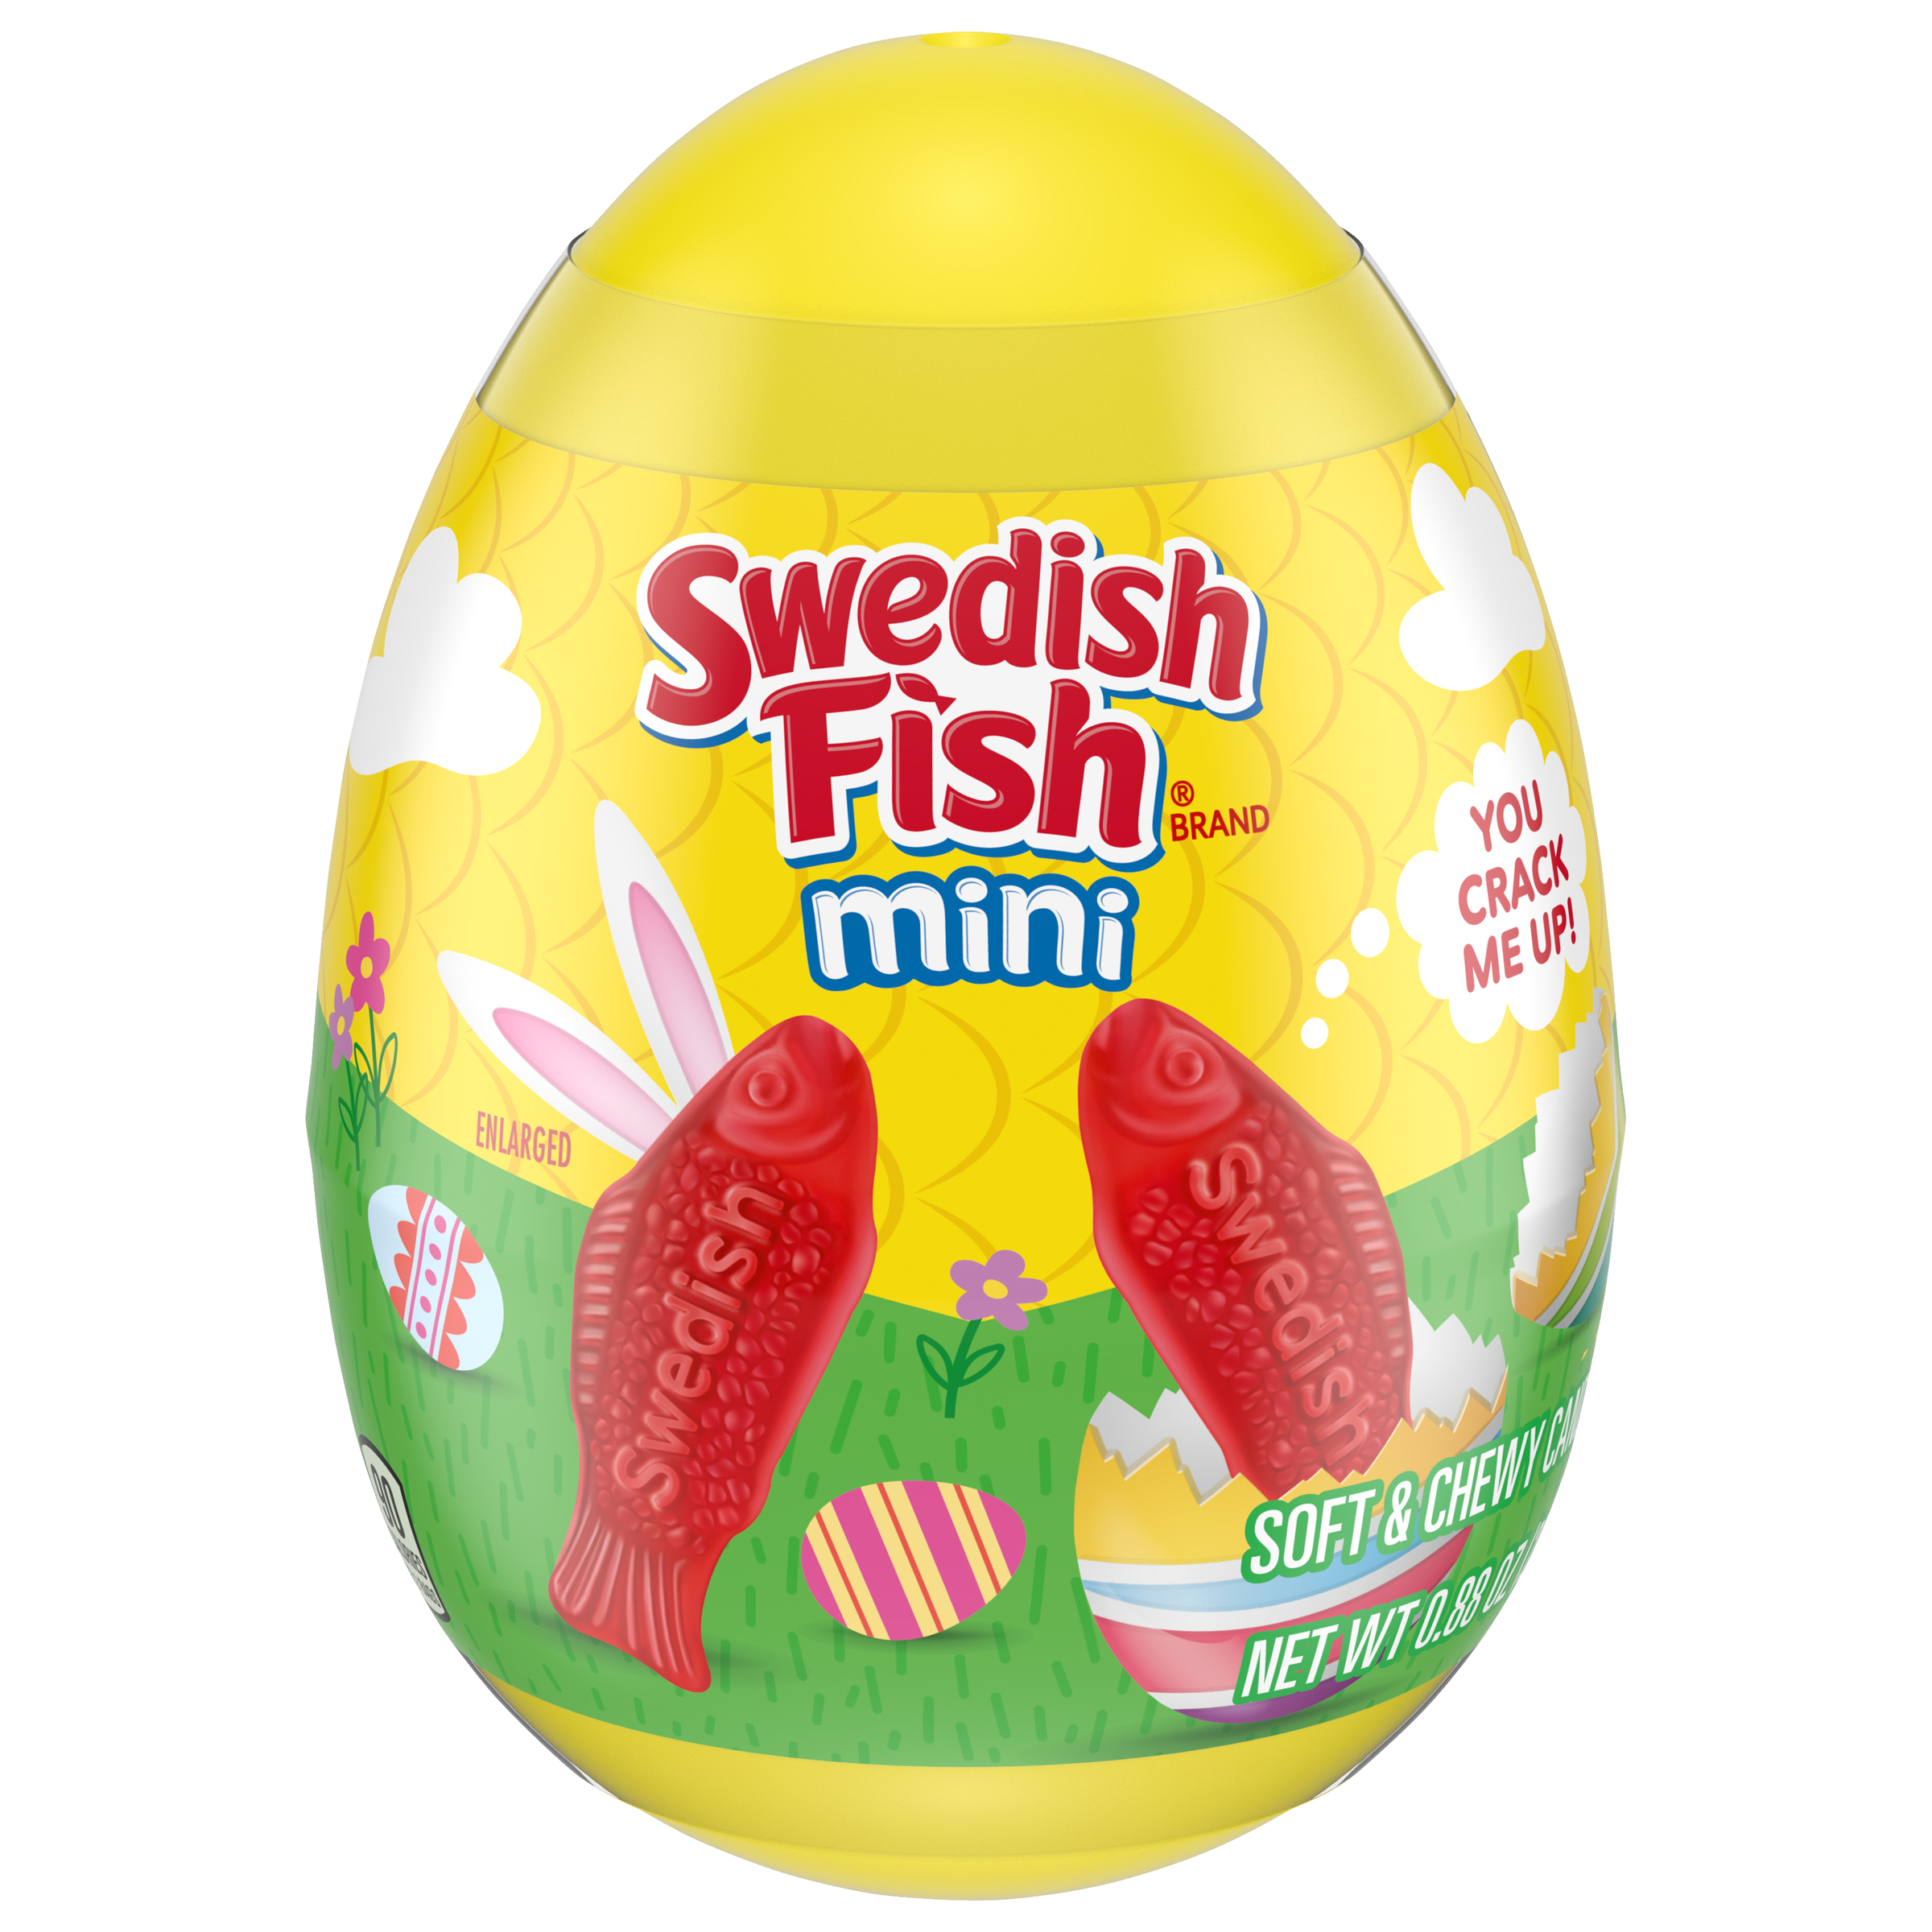 SWEDISH FISH Mini Soft & Chewy Easter Candy, 0.88 oz Easter Egg